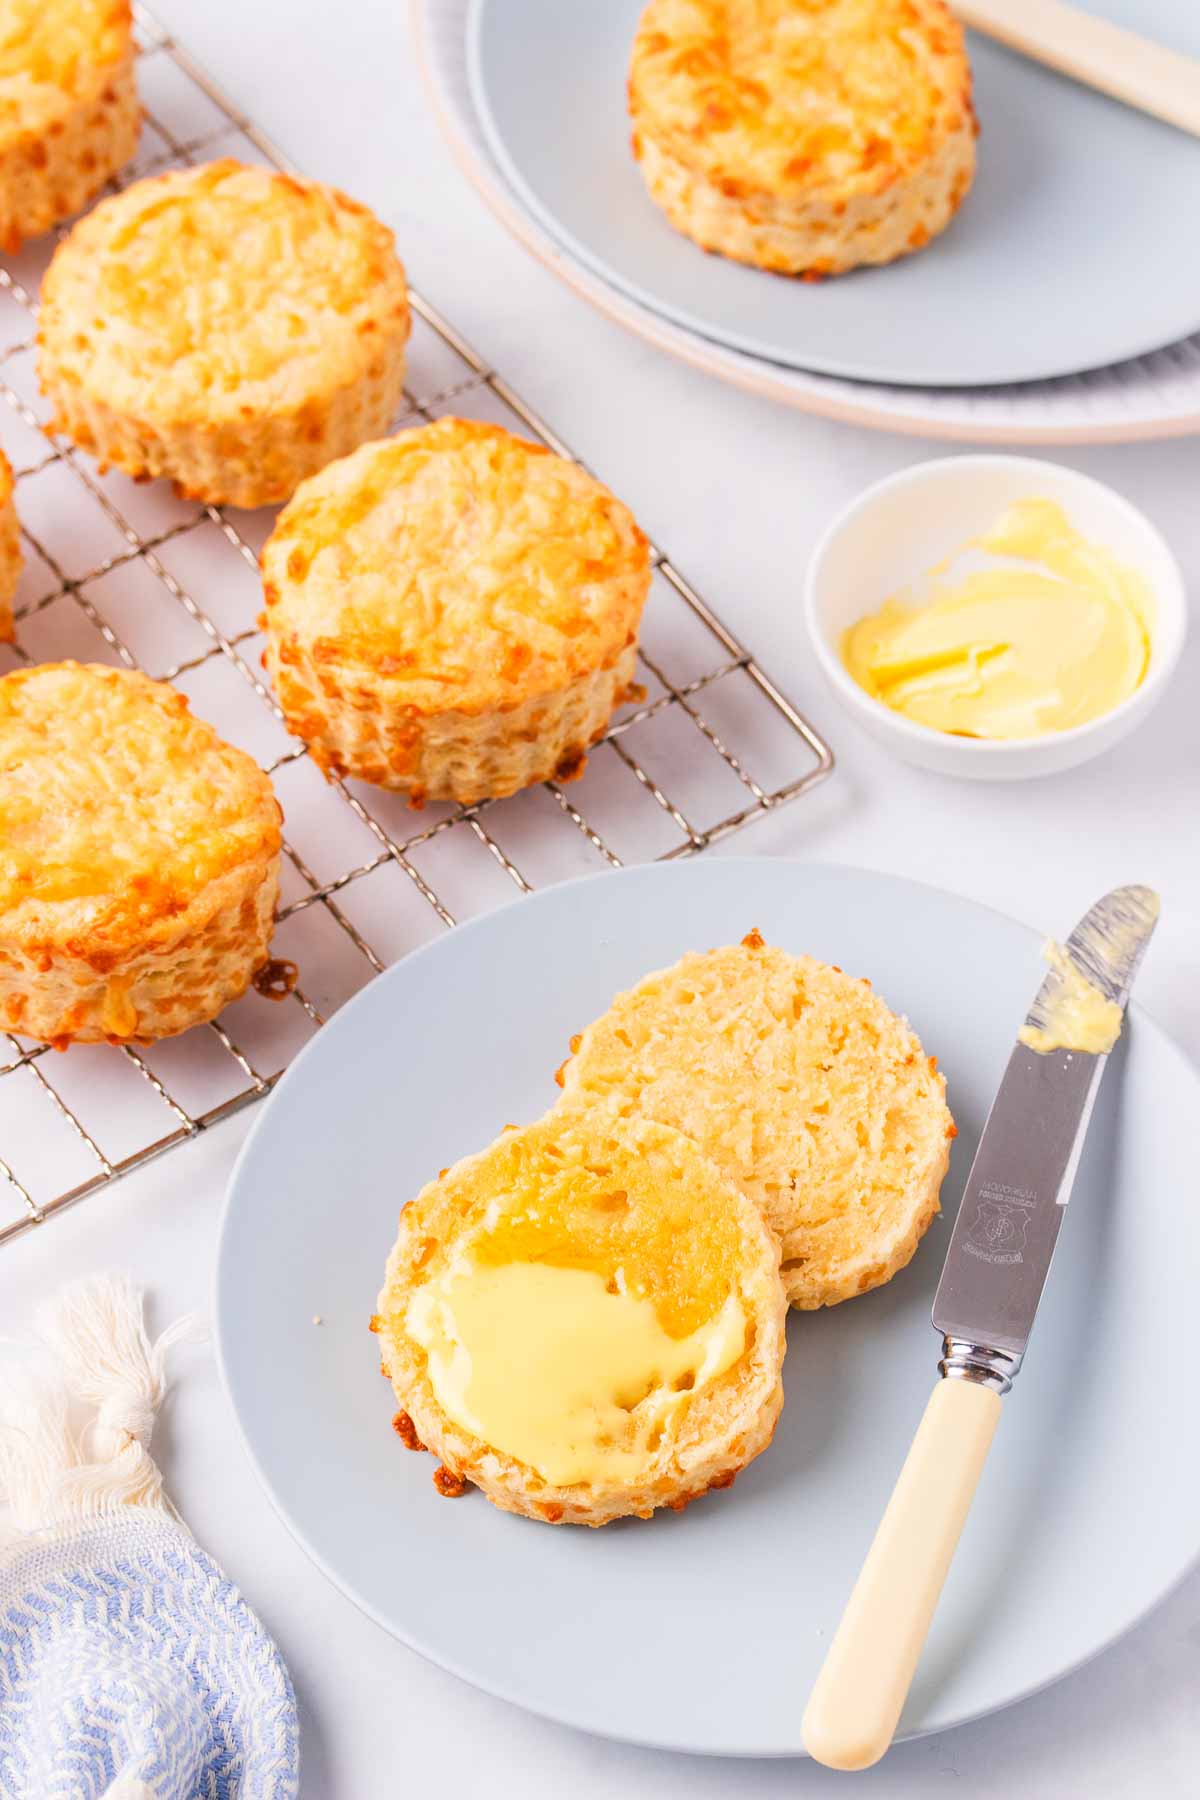 A split cheese scone spread with butter on a light blue plate, with a bone handled knife on the side.